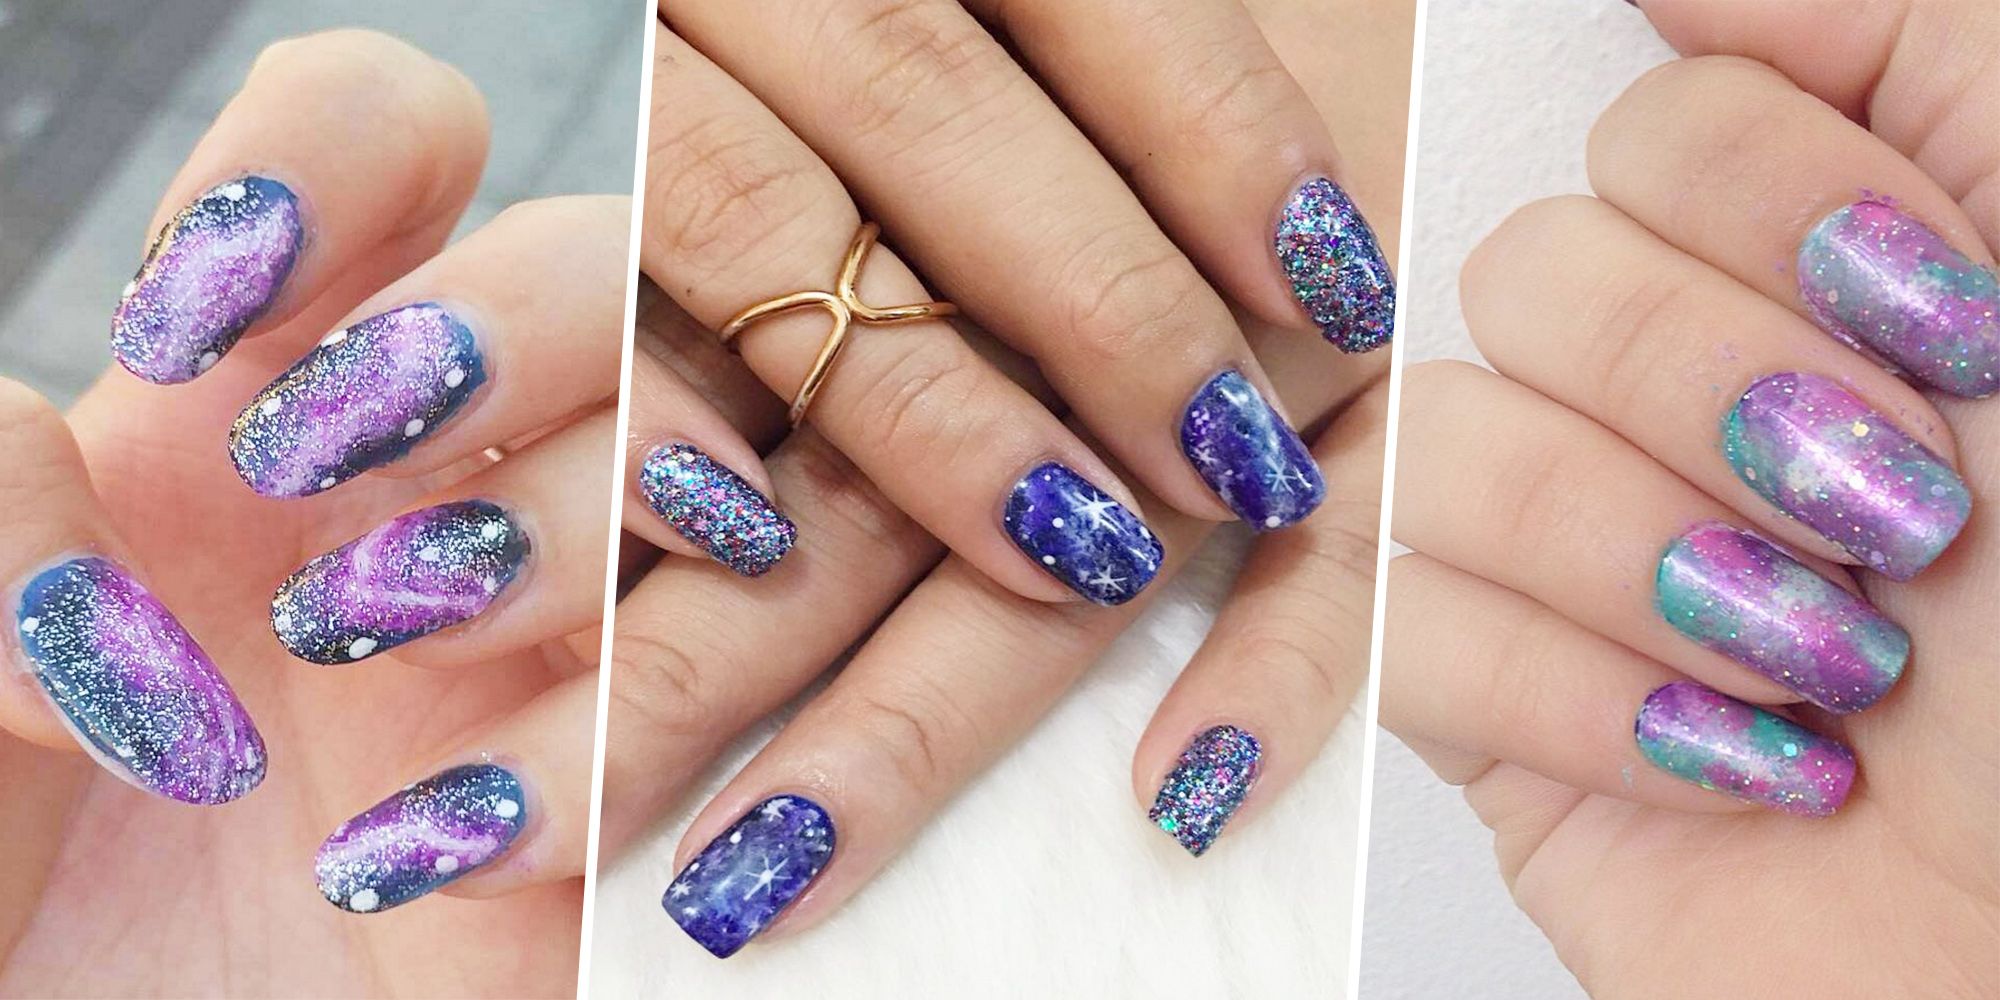 3. Galaxy Nails with Star Studs - wide 1